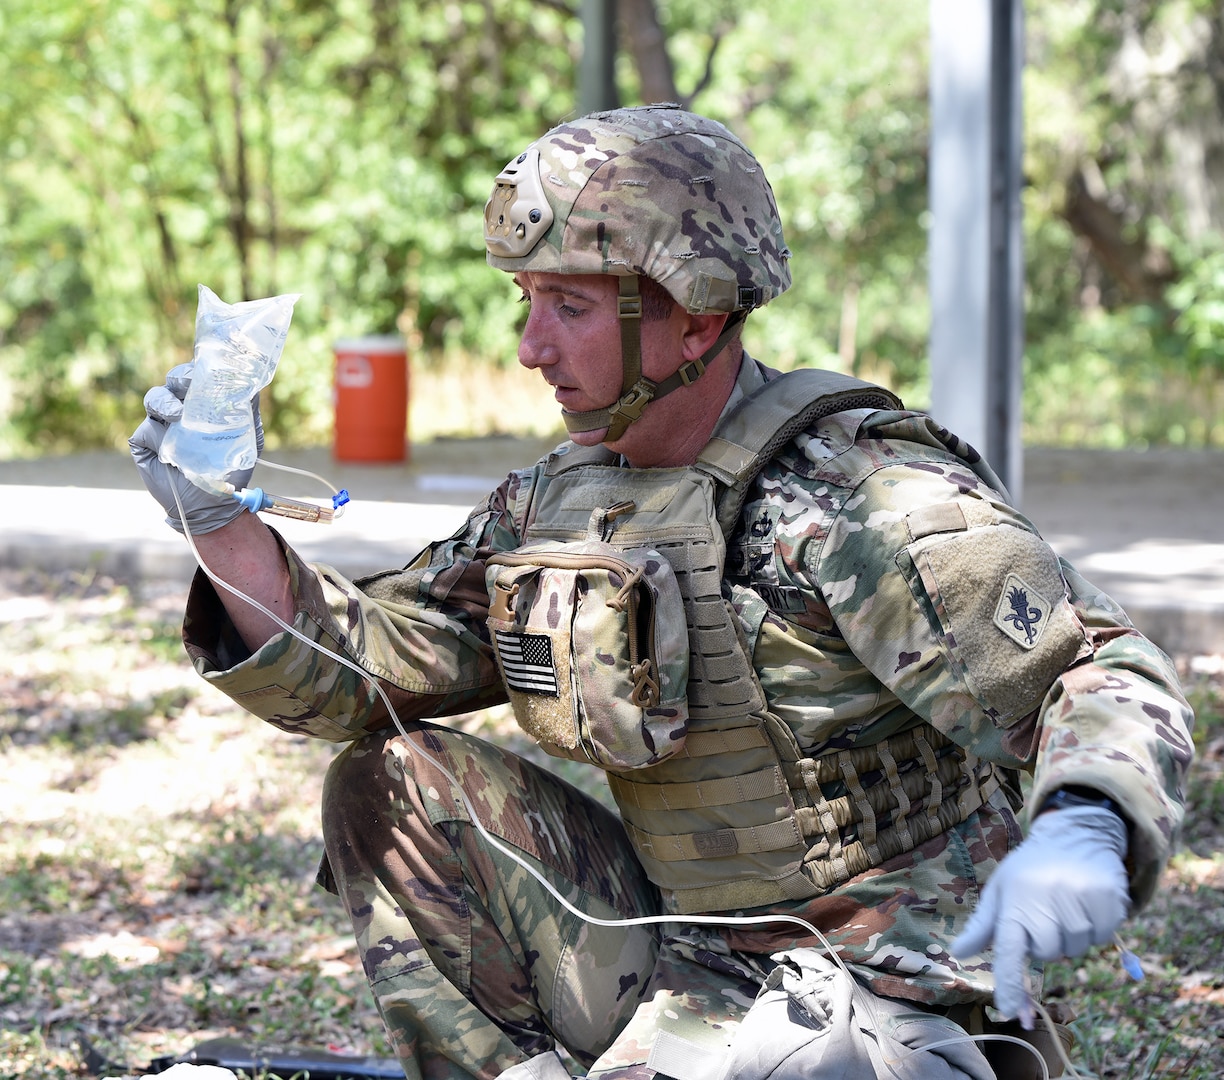 Sgt. 1st Class Jeremy Shepler, Headquarters Medical Professional Training Brigade, prepares to administer intravenous fluids to a simulated casualty on the Best Medic lane.